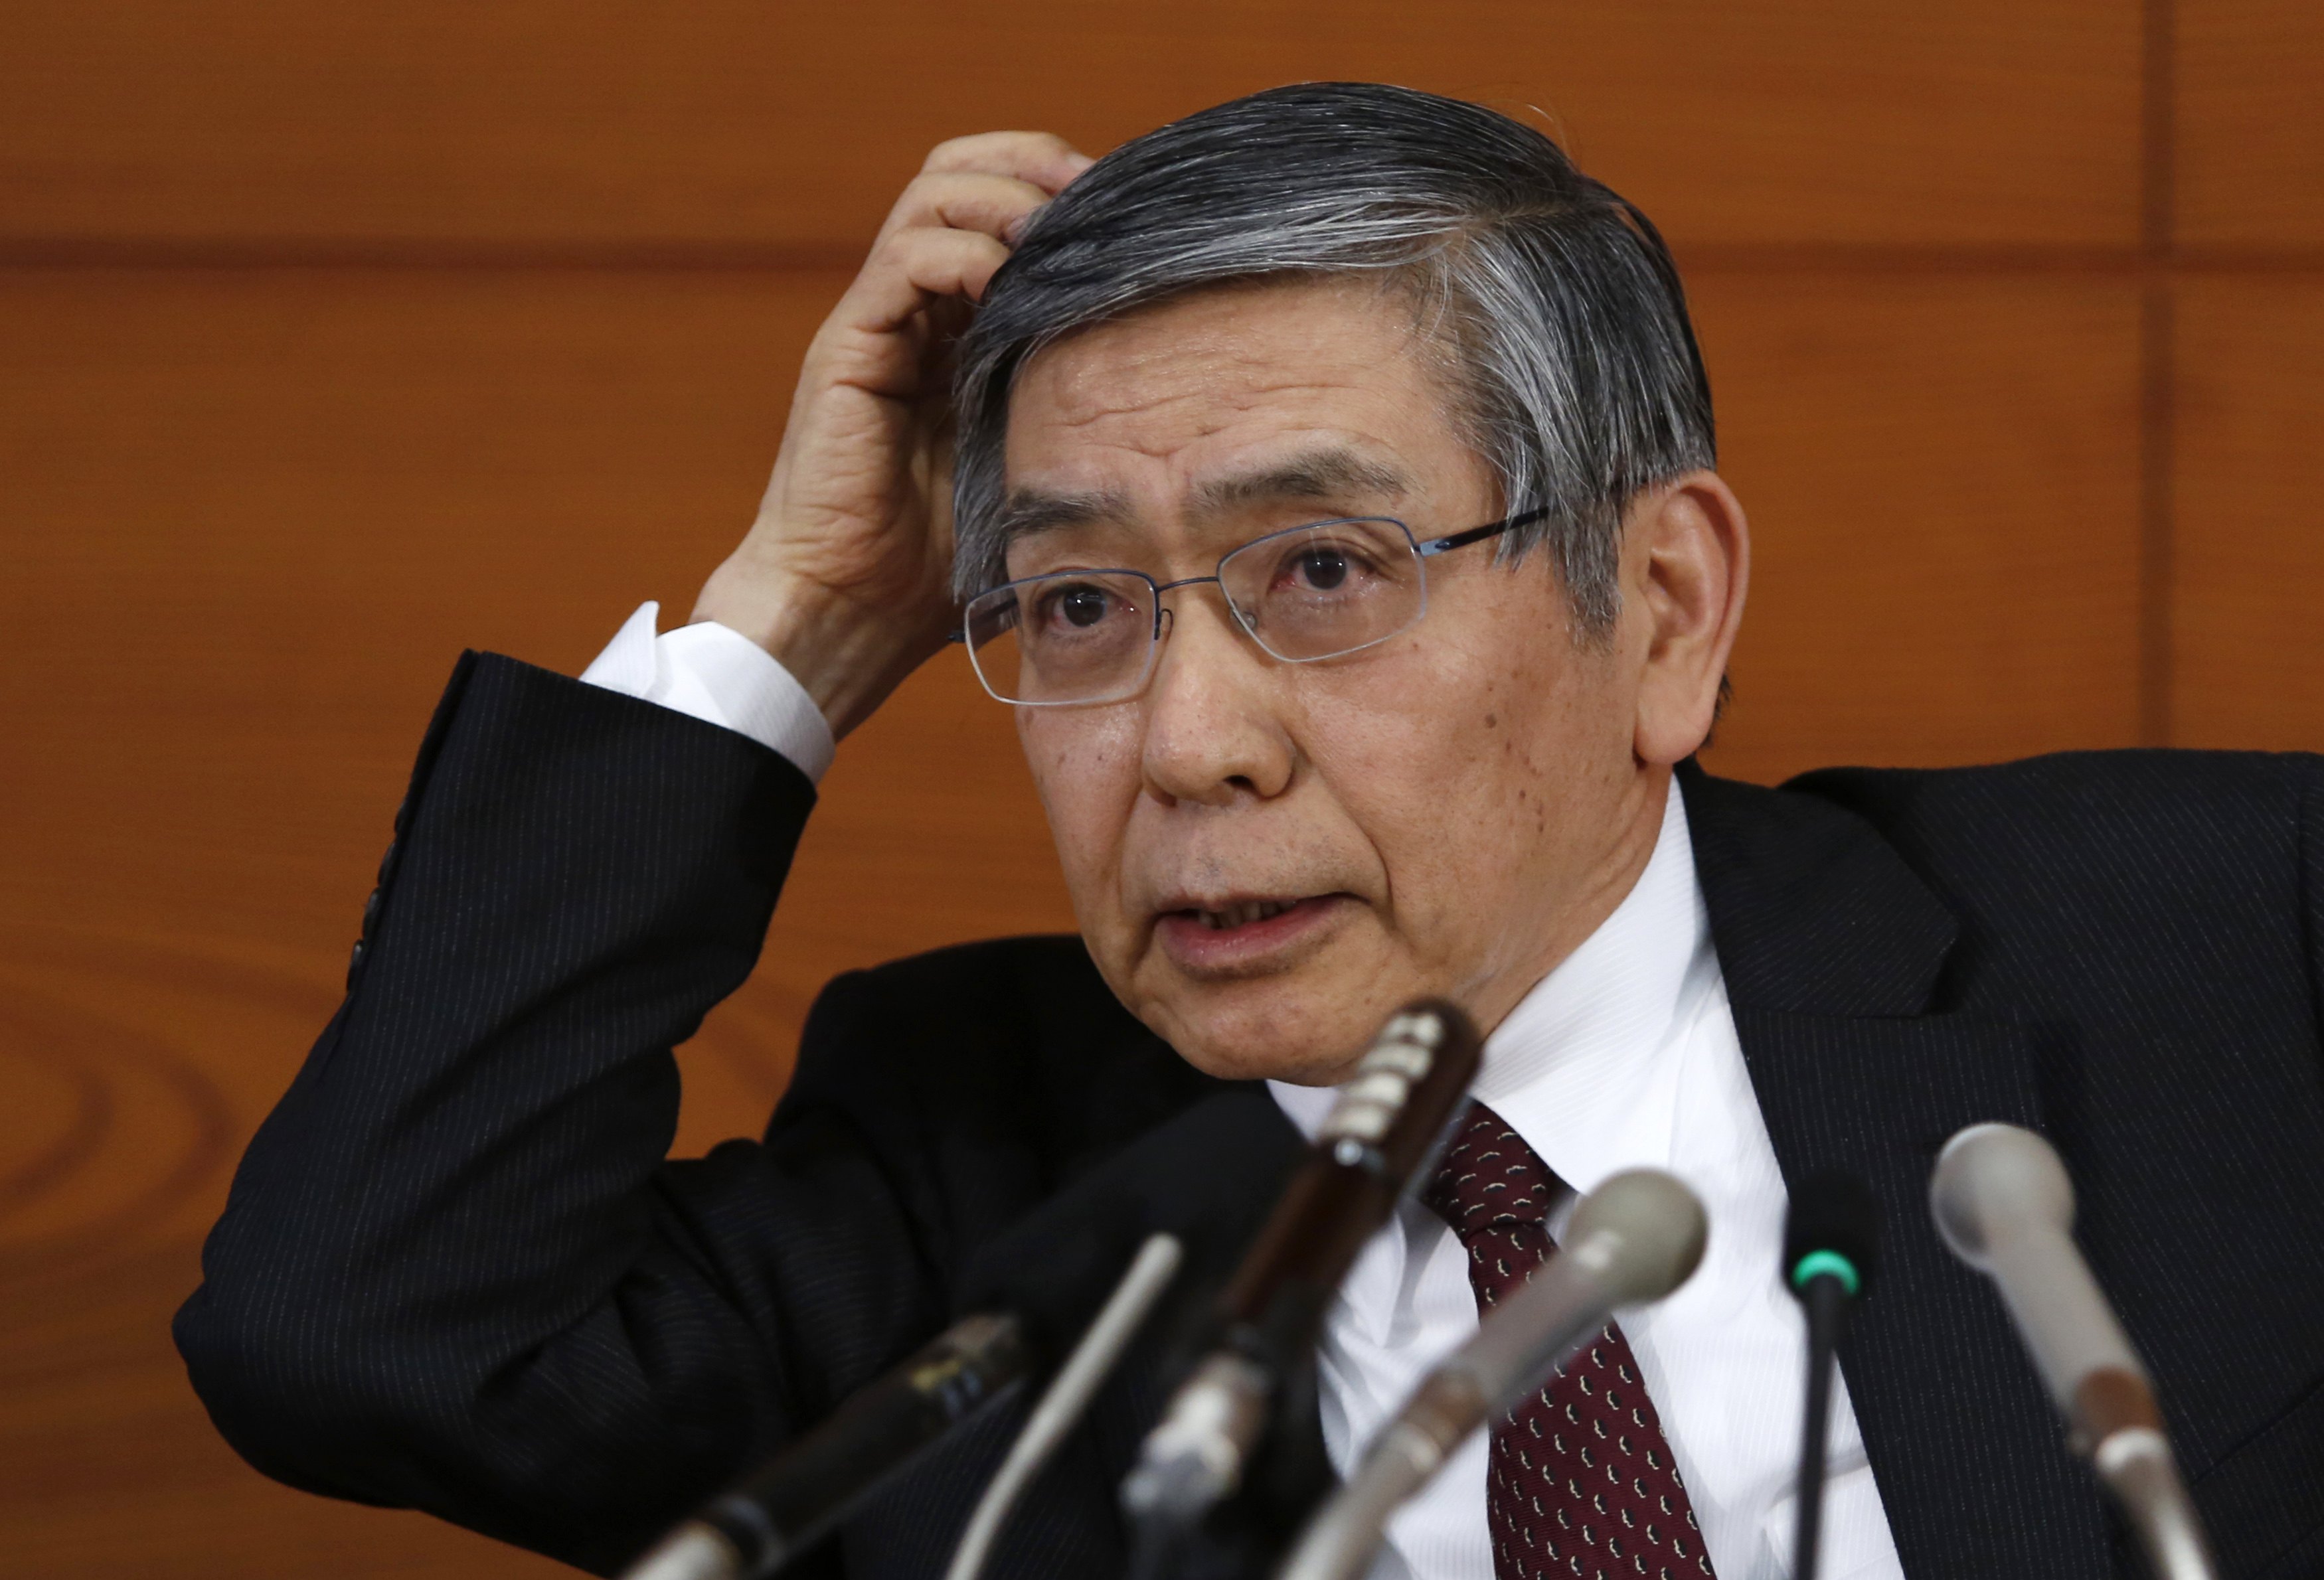 Bank of Japan Governor Kuroda scratches his head as he listens to questions from a reporter during a news conference in Tokyo